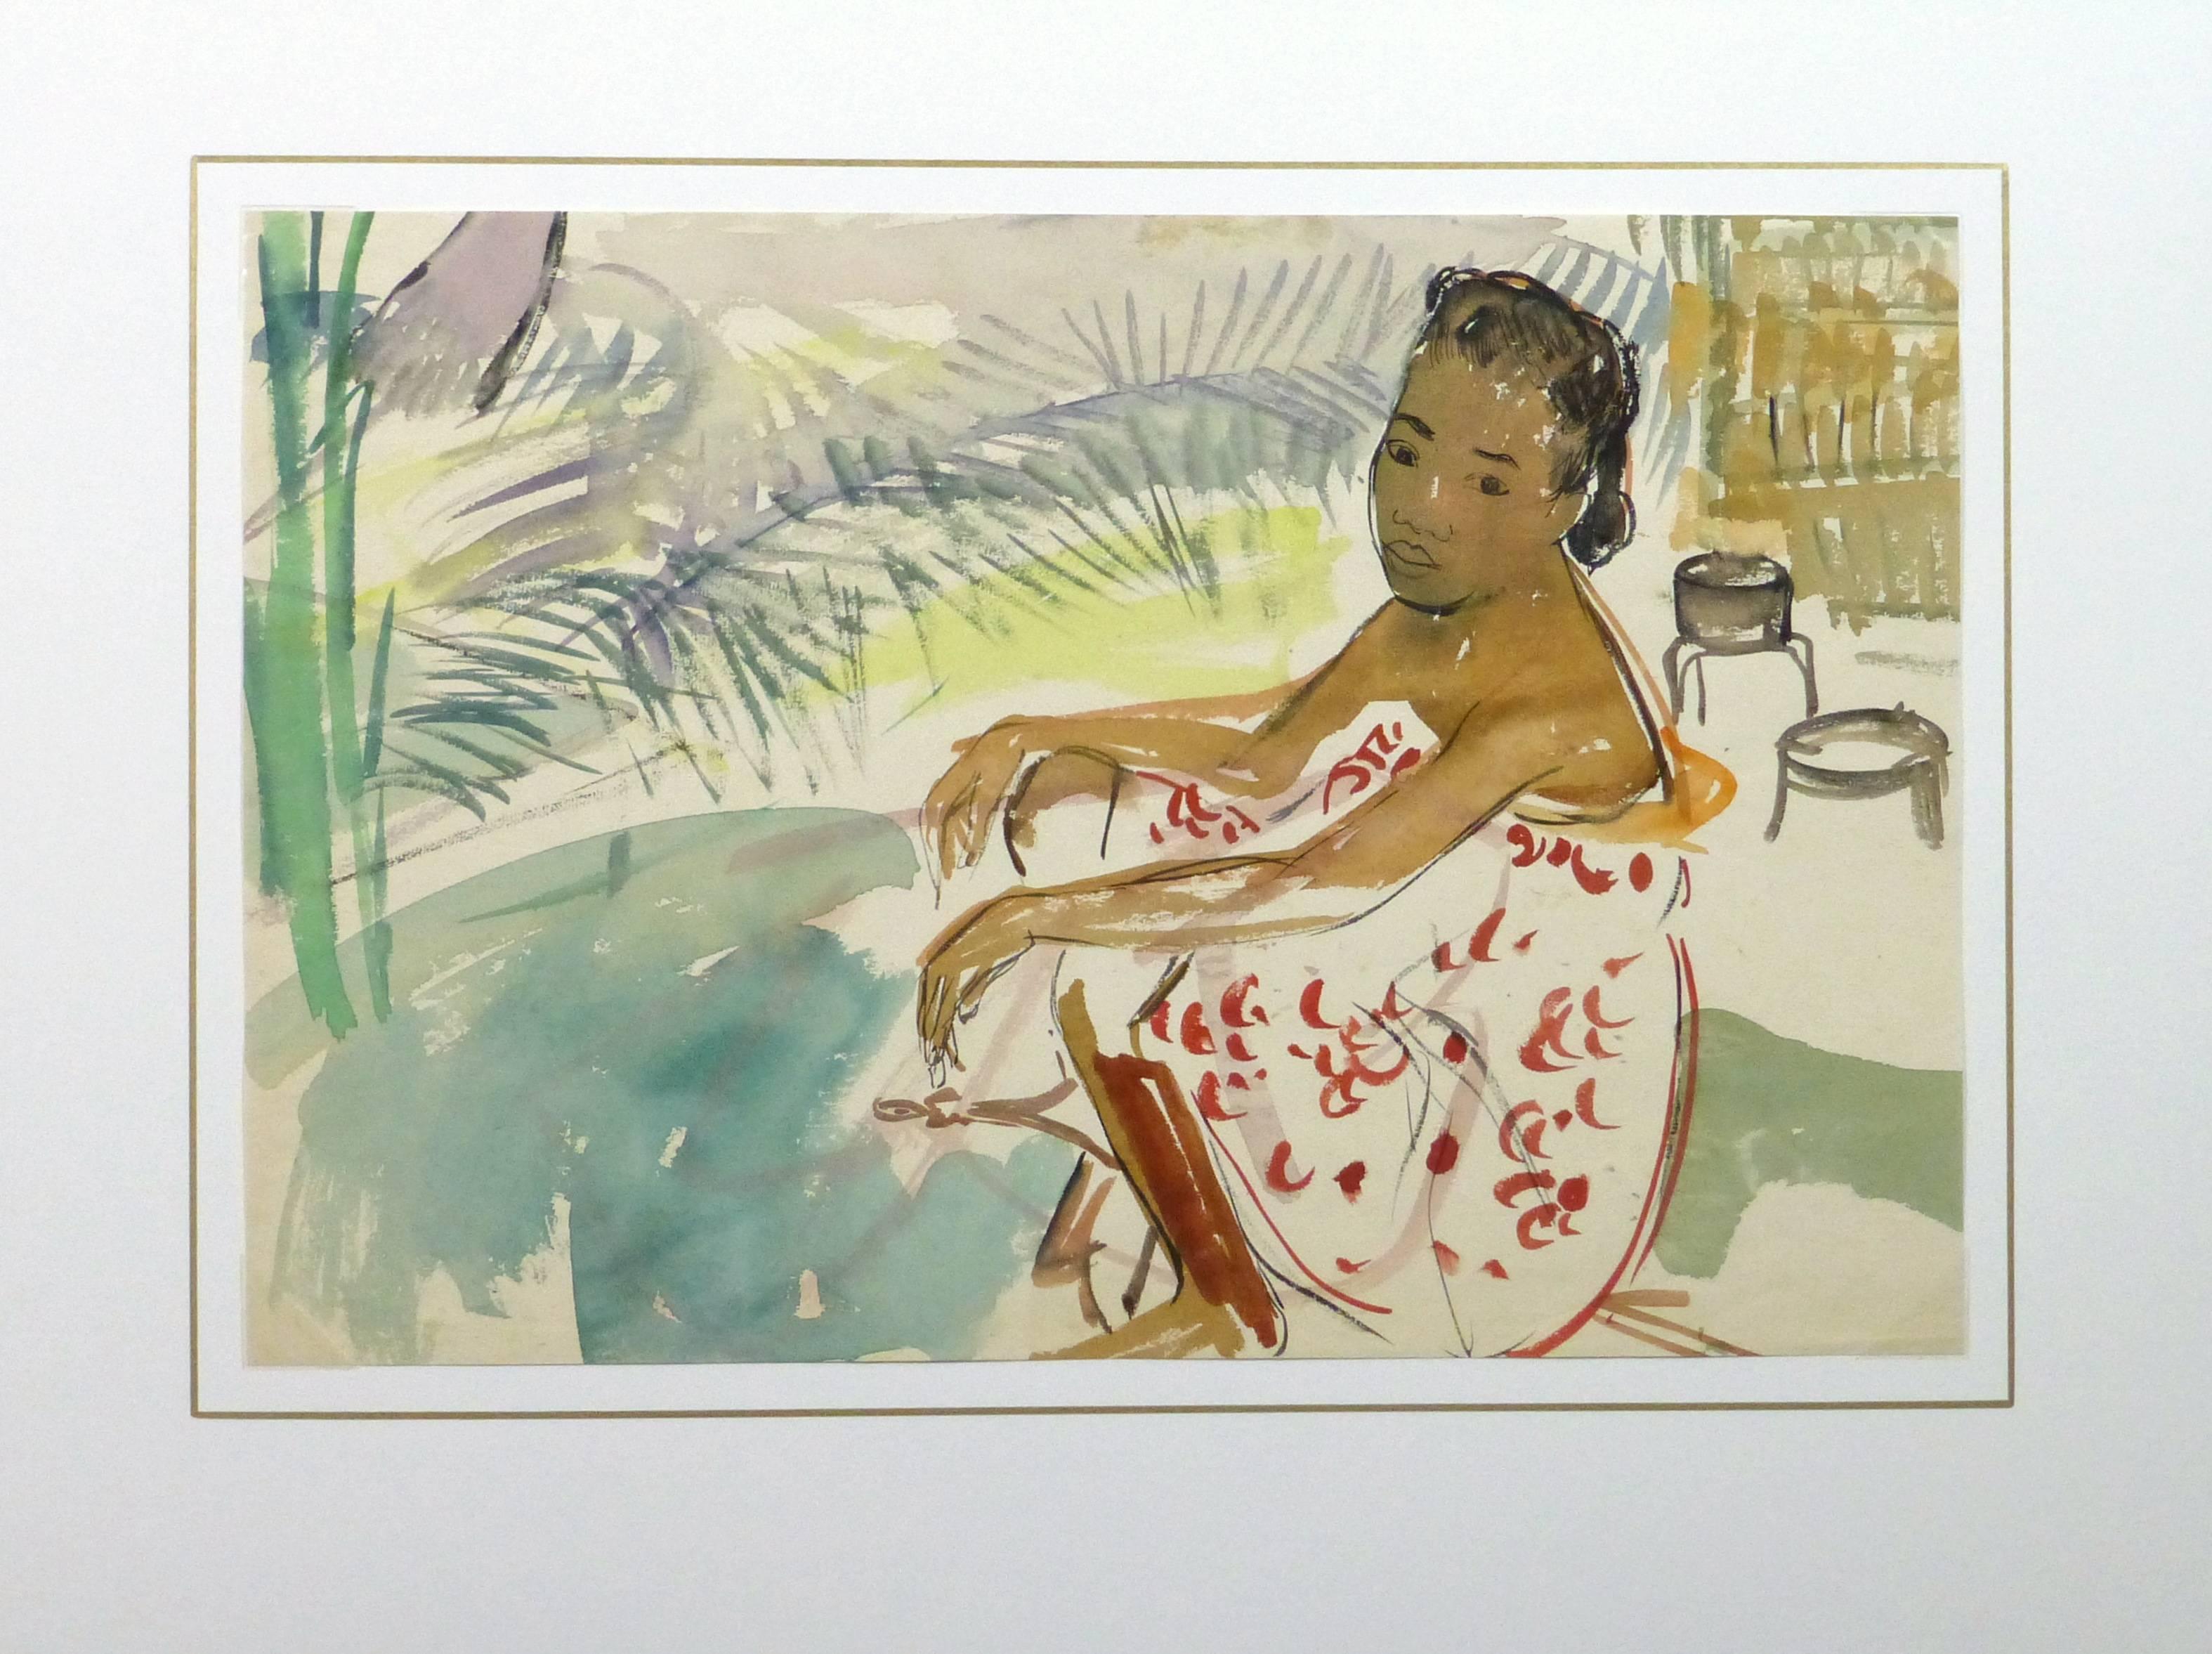 Stunning watercolor of a portrait of a Madagascar woman surrounded by tropical foliage by French artist Stephane Magnard, circa 1950.

Original one-of-a-kind artwork on paper displayed on a white mat with a gold border. Mat fits a standard-size